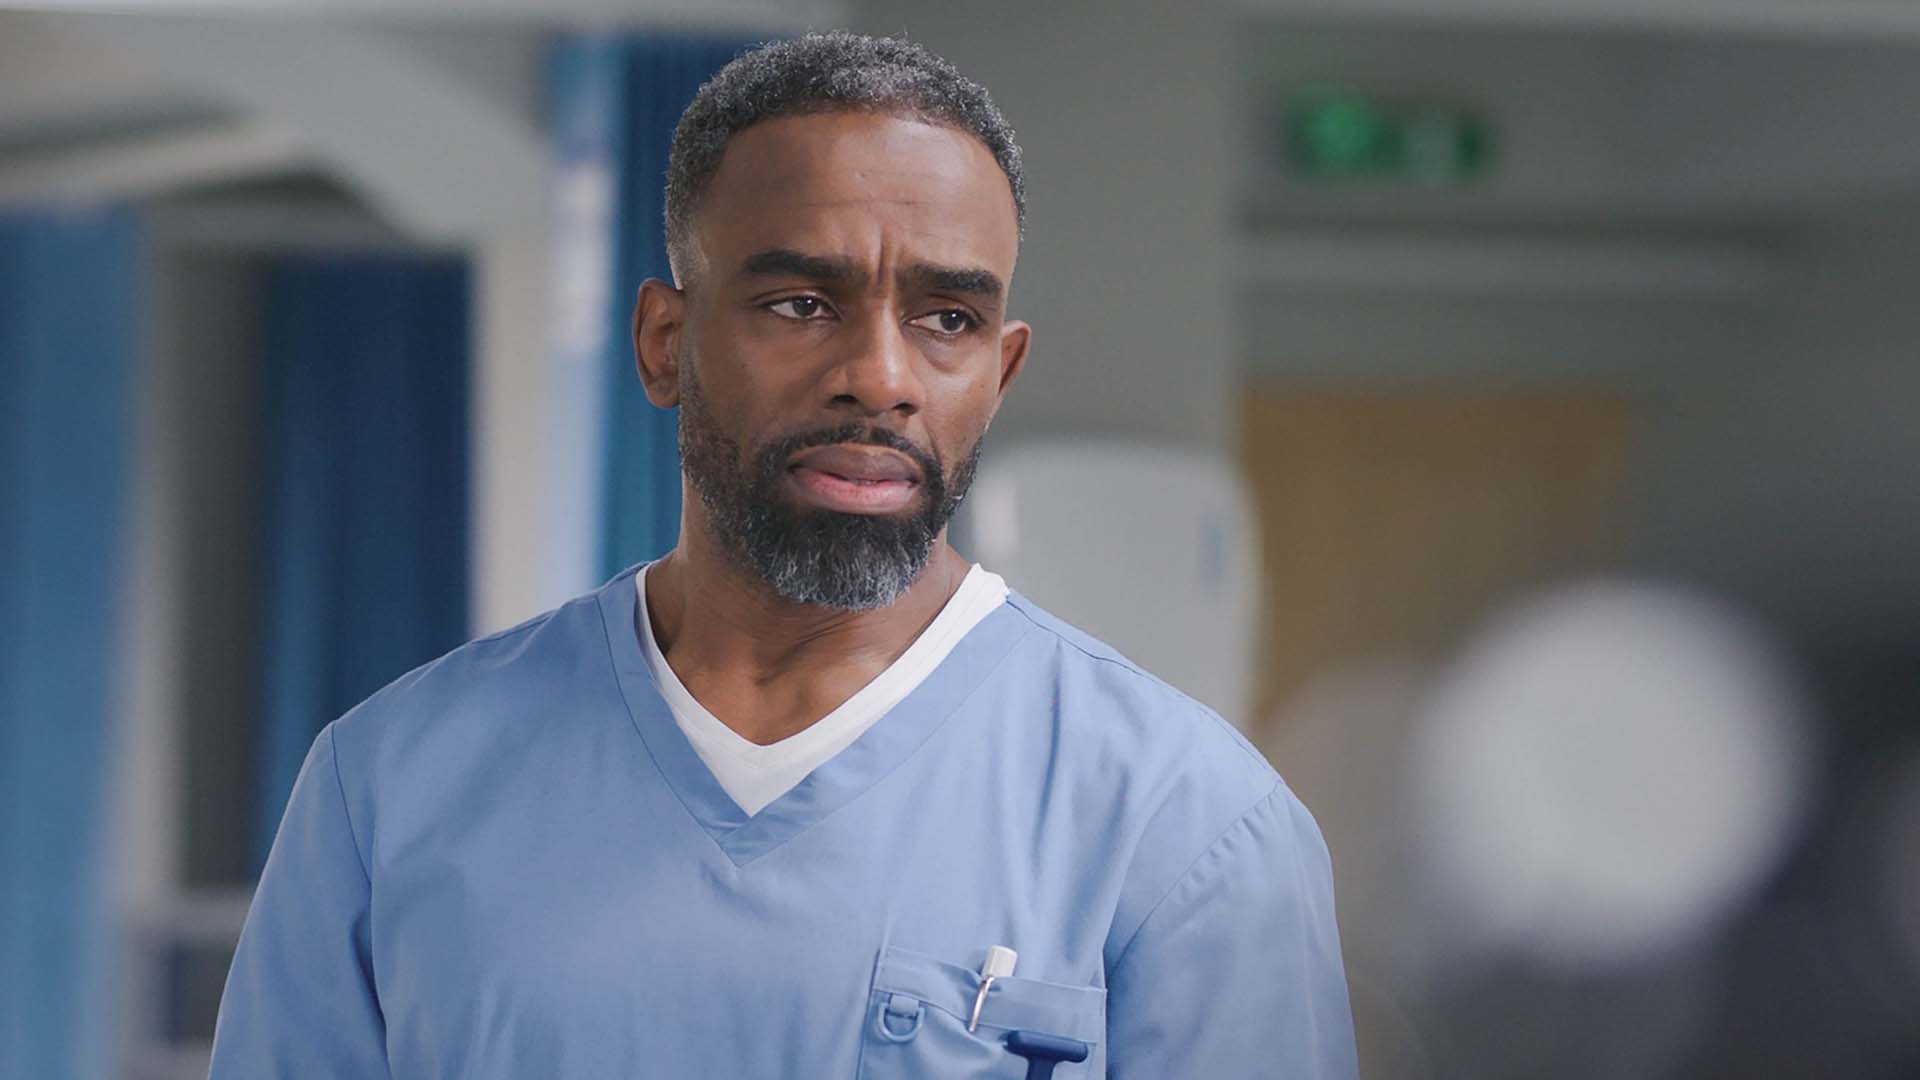 Chuckie Van in the hospital in the series Casualty